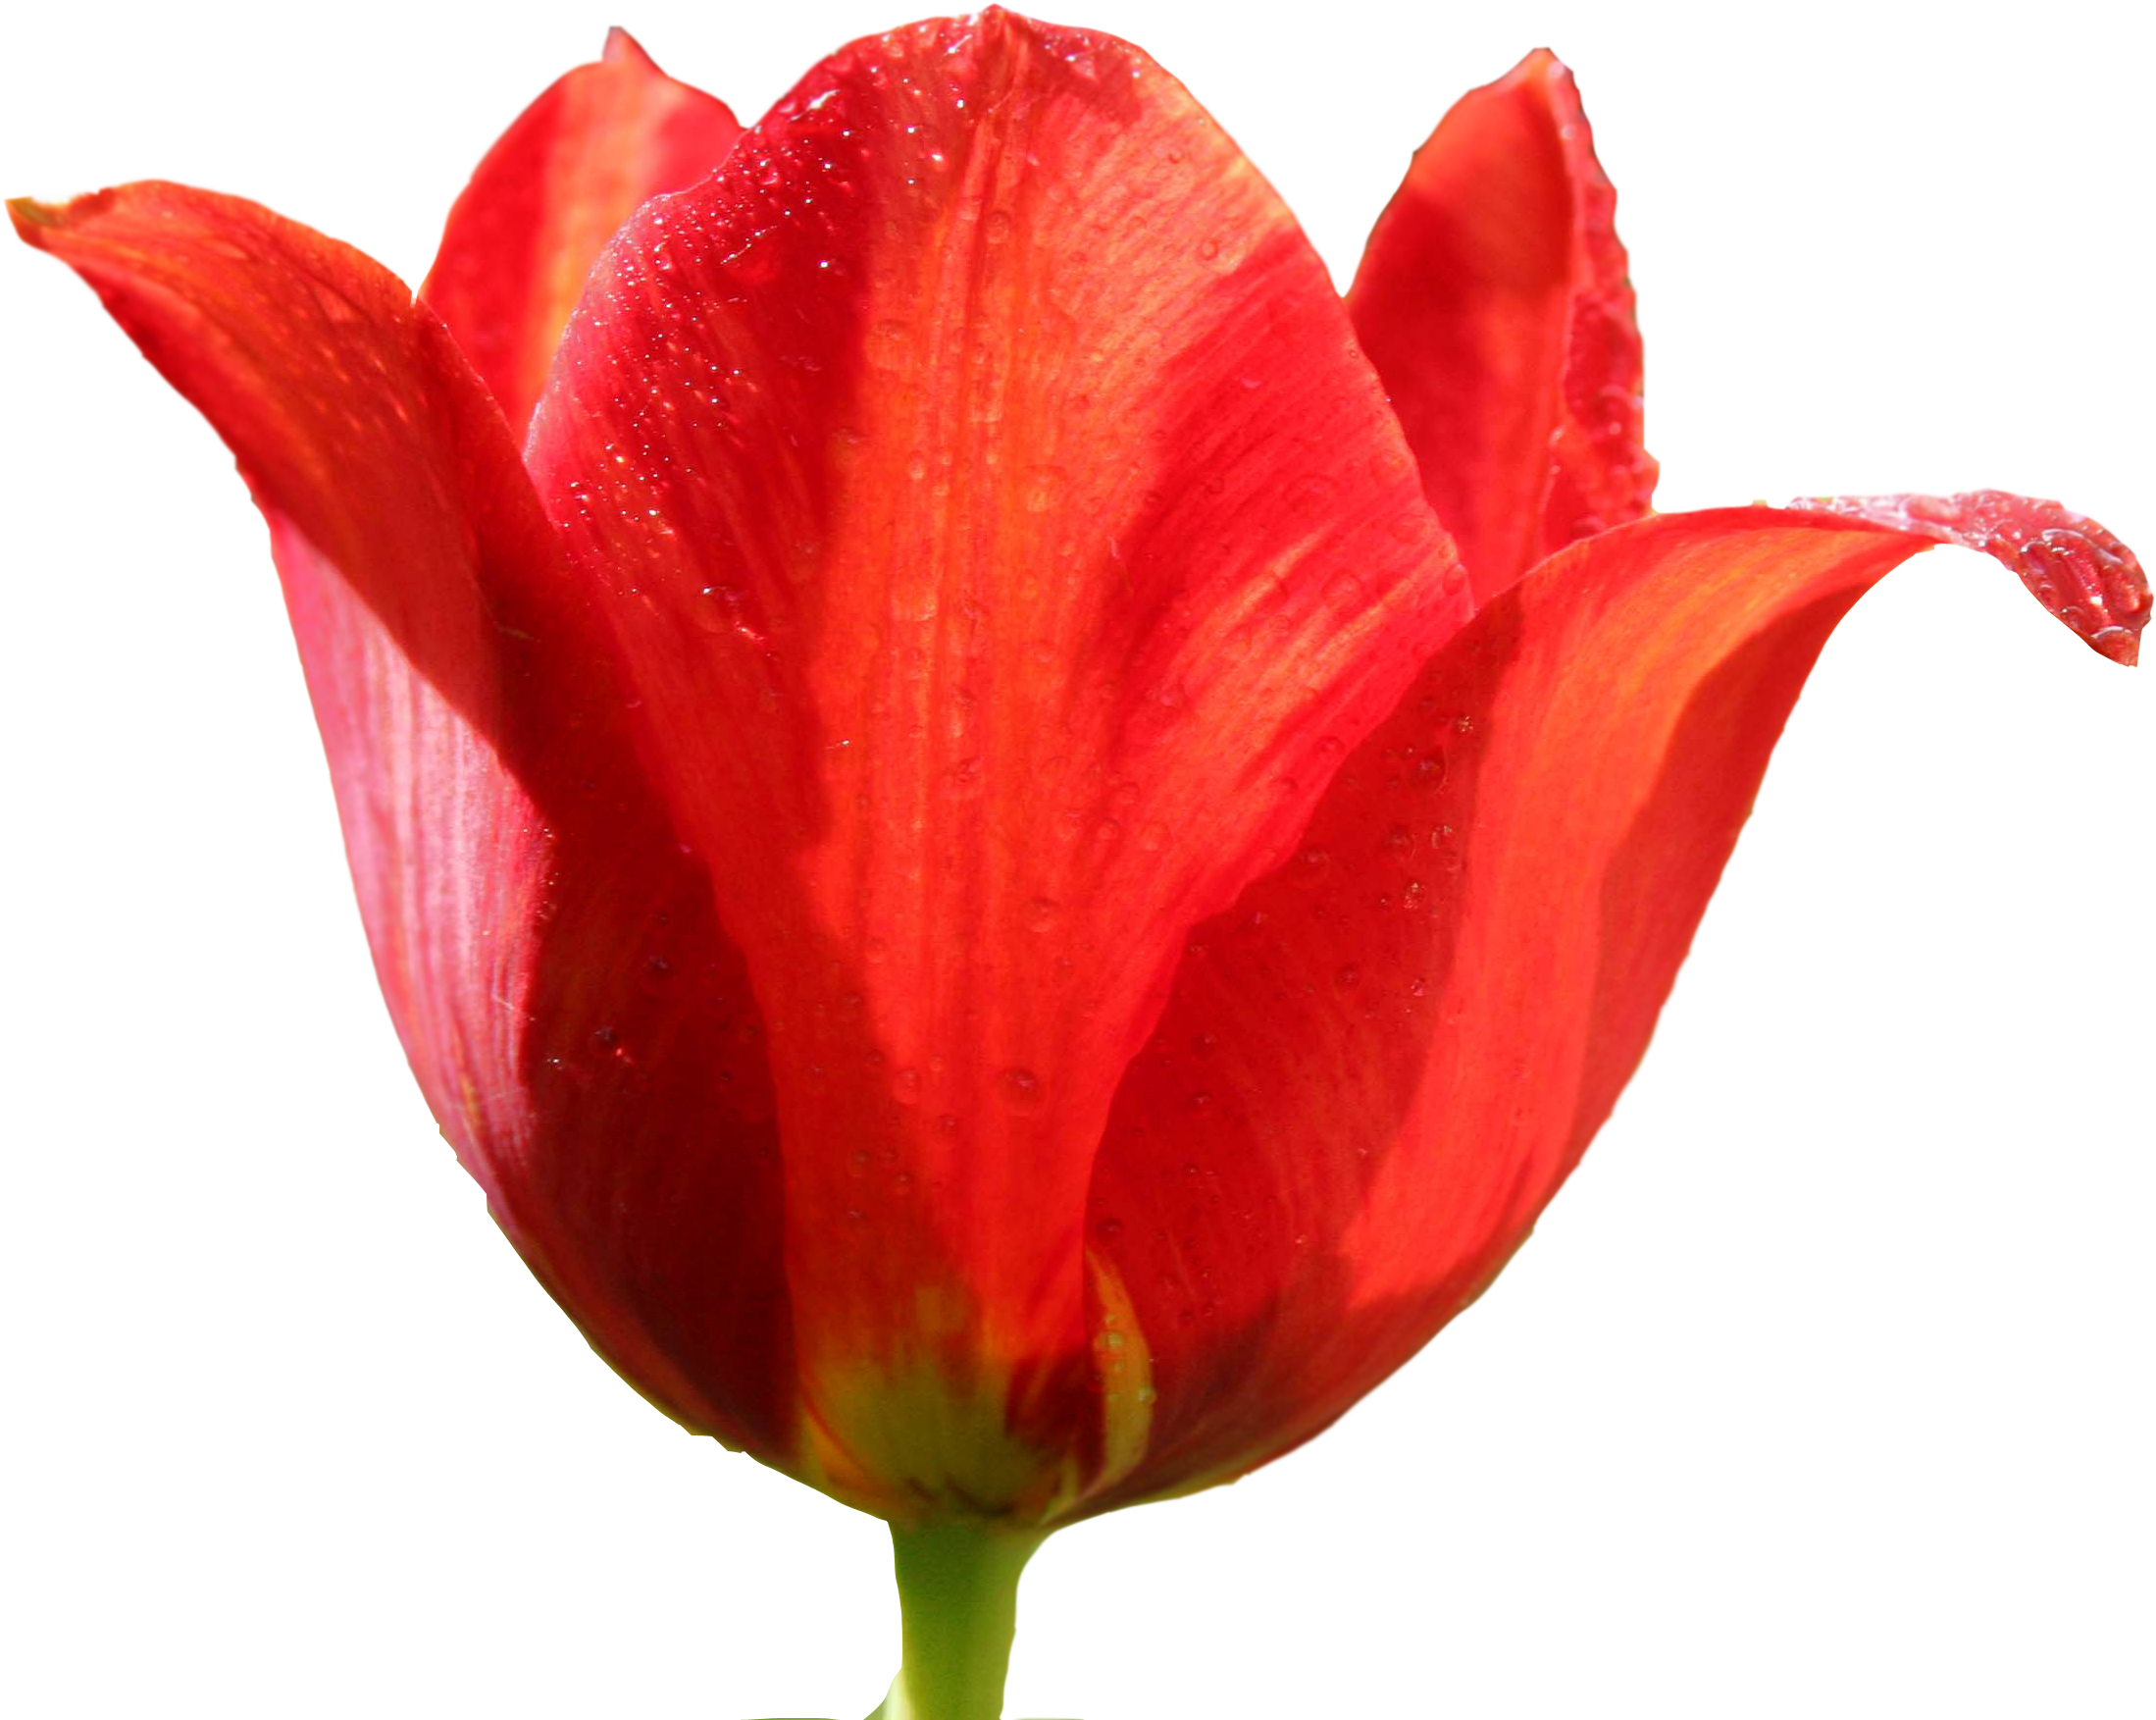 A Close Up Of A Red Flower